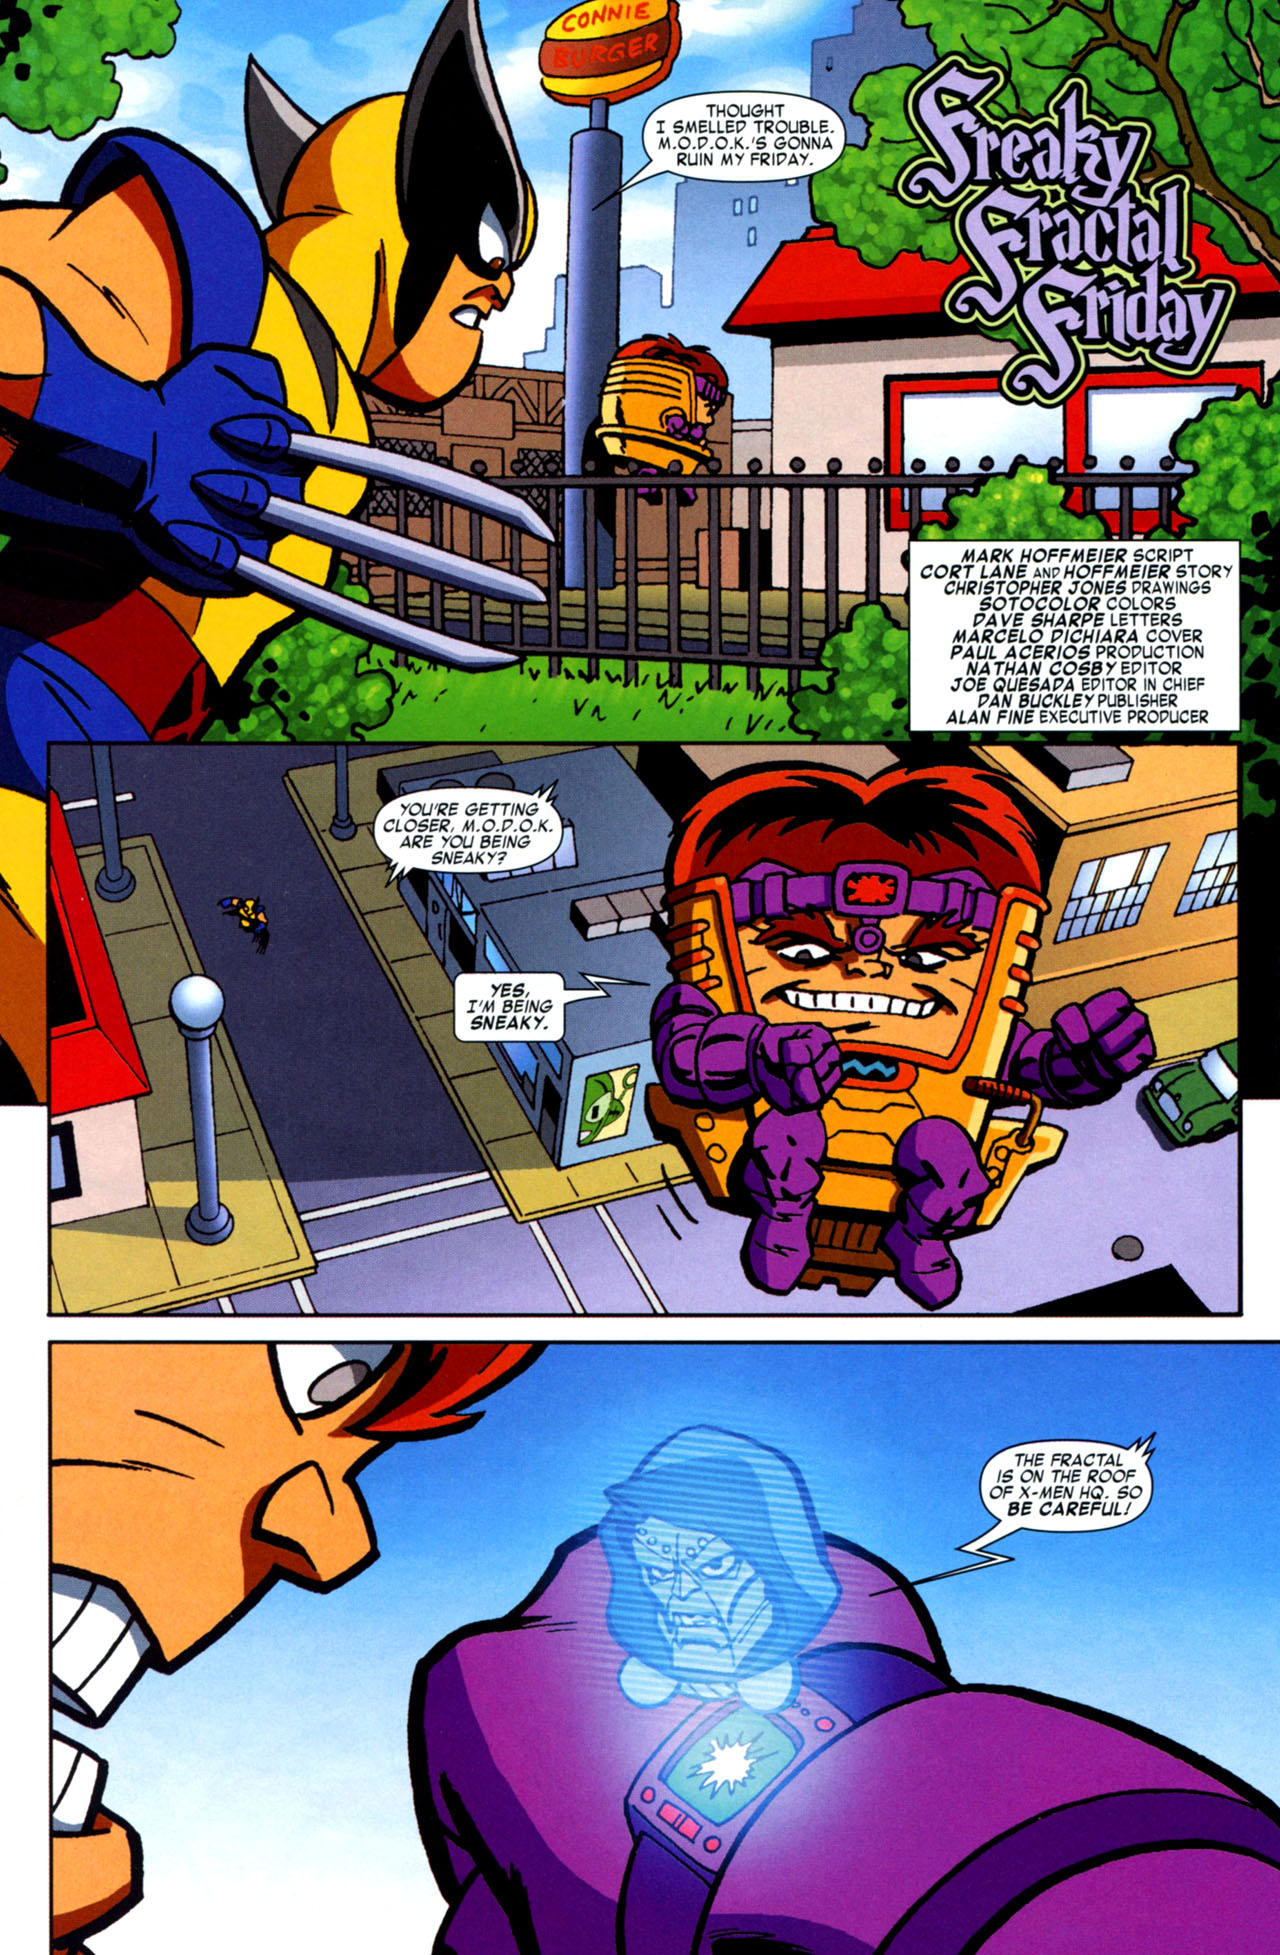 Marvel Super Hero Squad Issue 1 | Read Marvel Super Hero Squad Issue 1 comic  online in high quality. Read Full Comic online for free - Read comics  online in high quality .| READ COMIC ONLINE